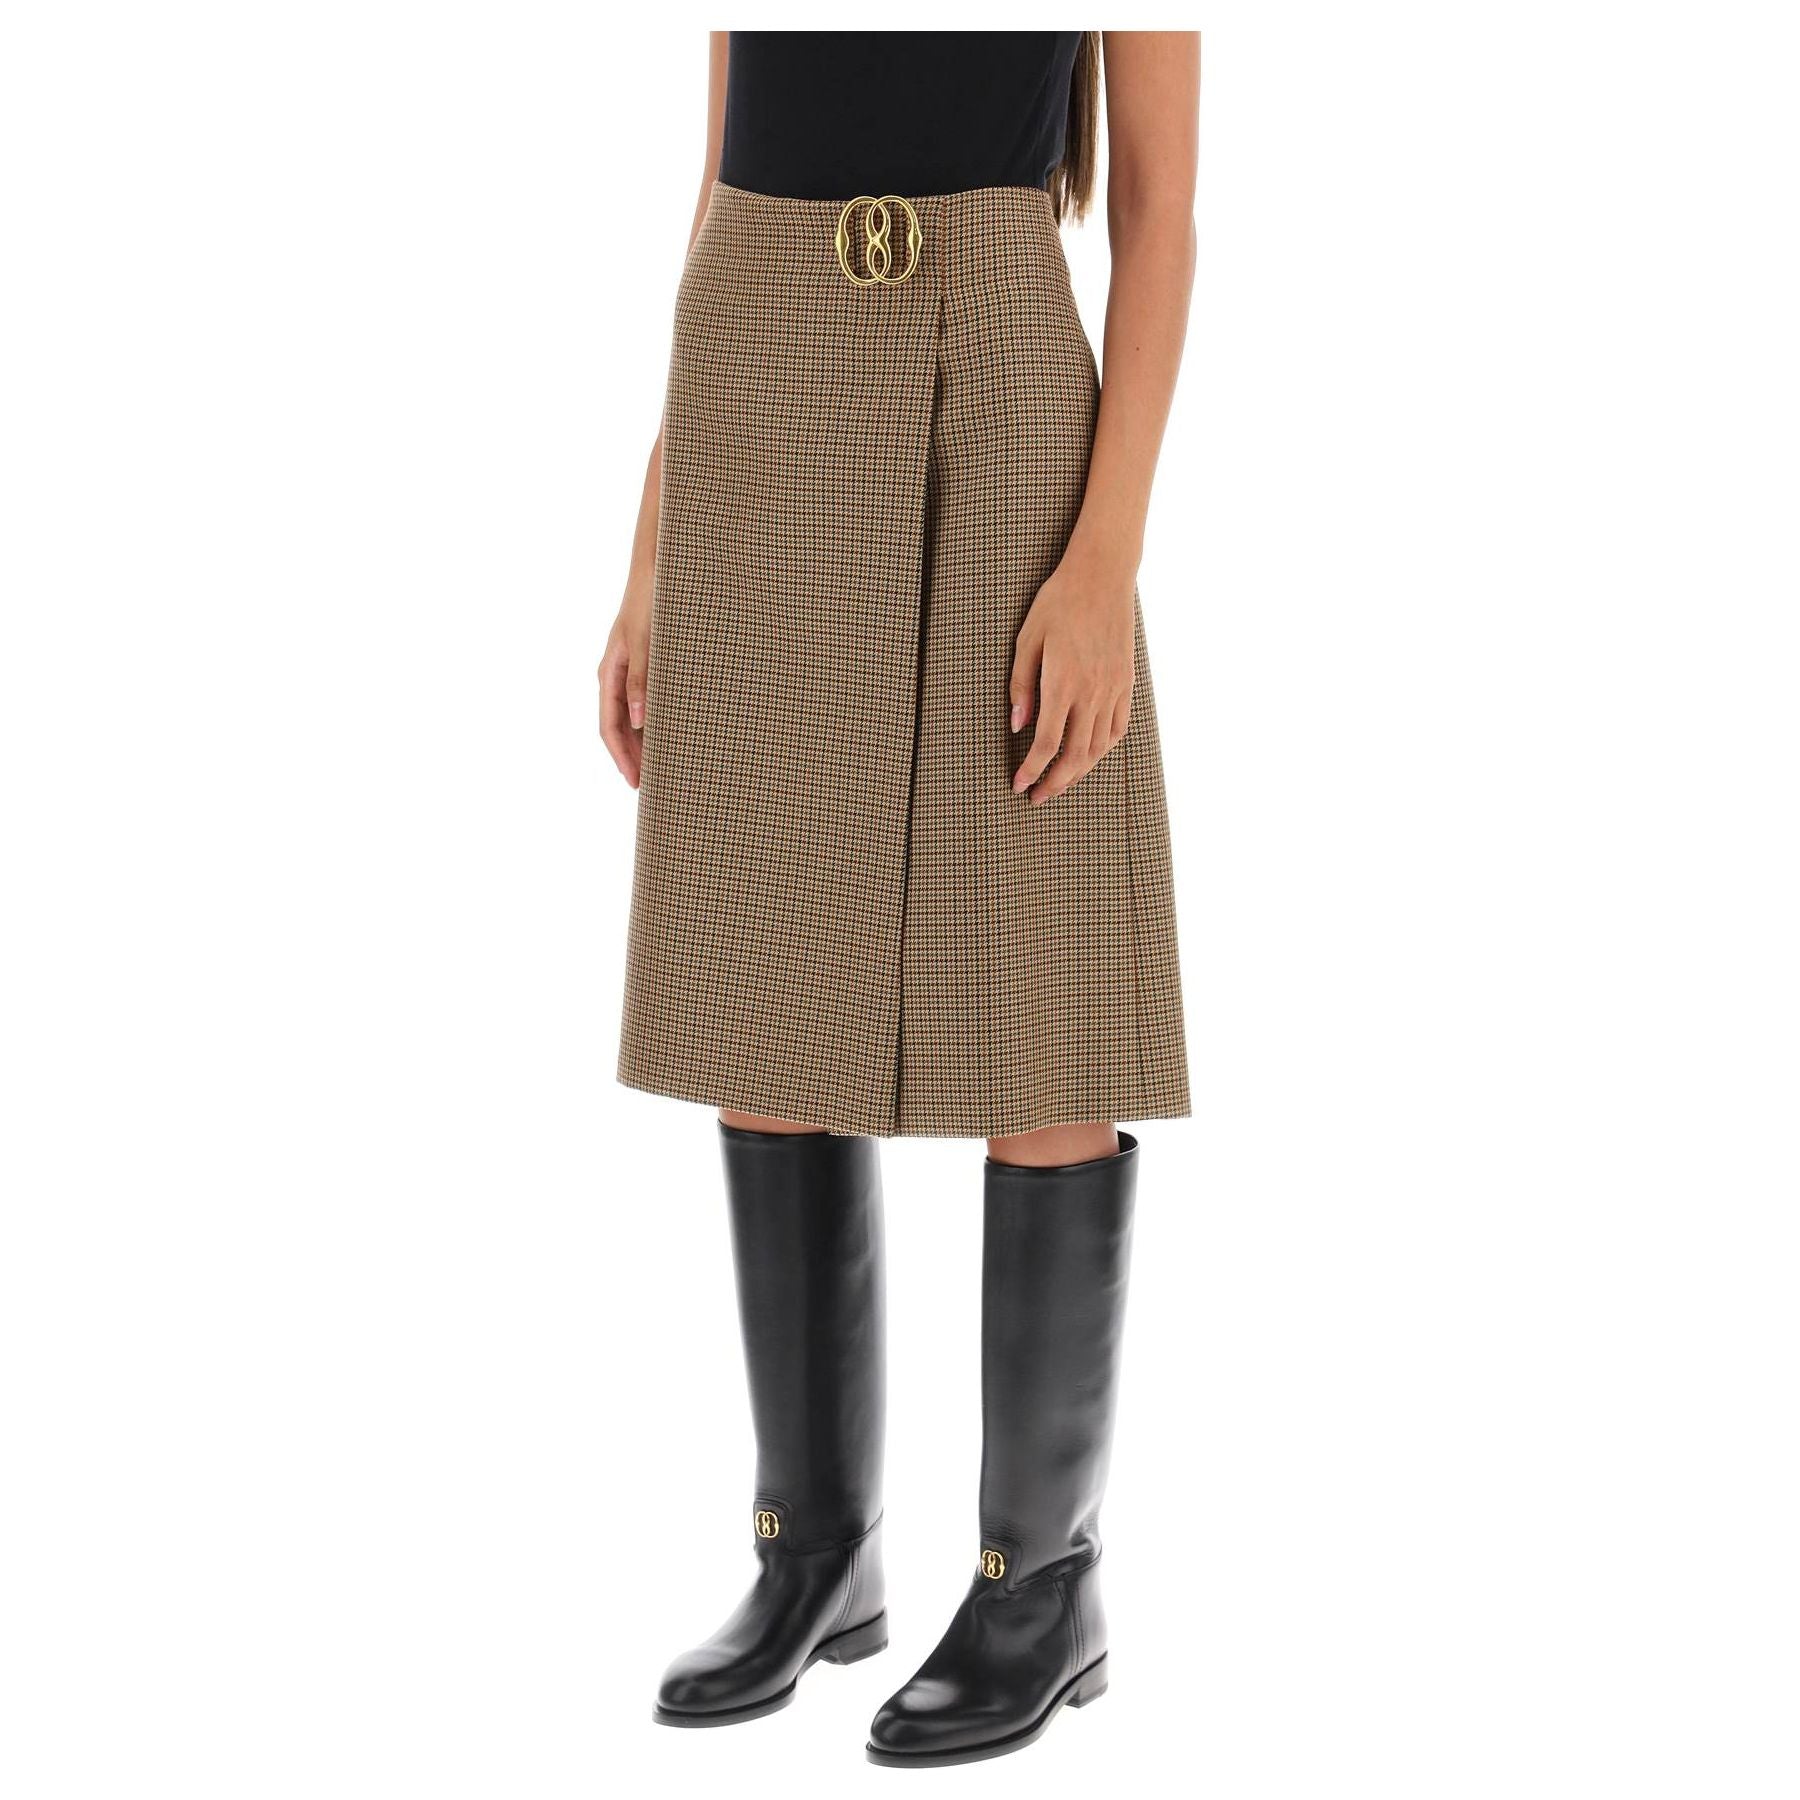 Houndstooth A Line Skirt With Emblem Buckle